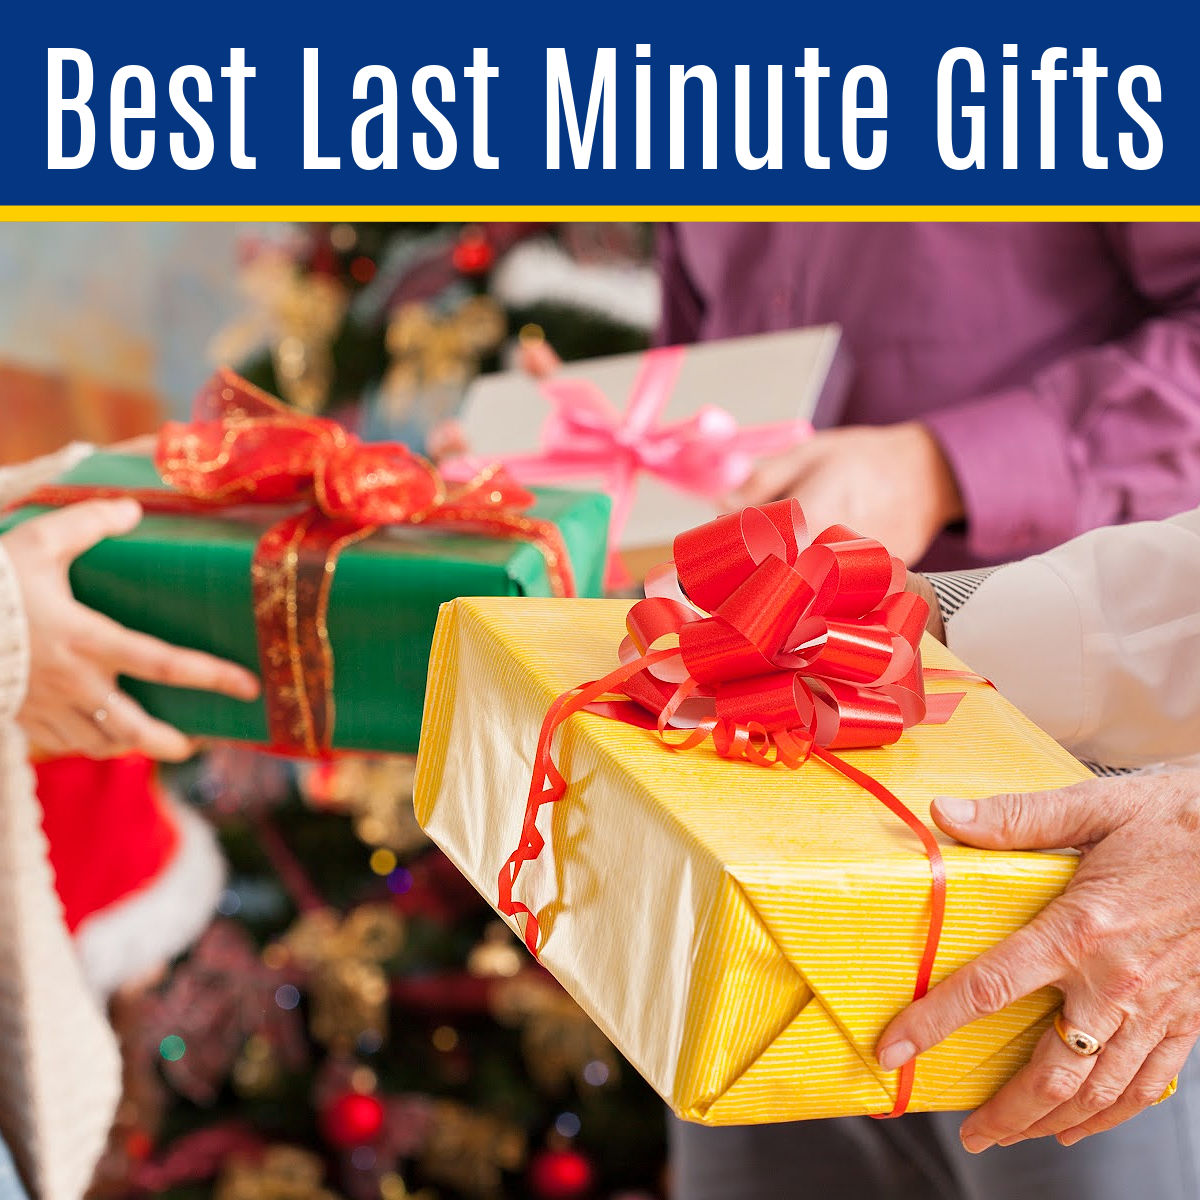 https://www.abbottsathome.com/wp-content/uploads/2018/12/Best-Last-Minute-Gifts-Email-Text.jpg